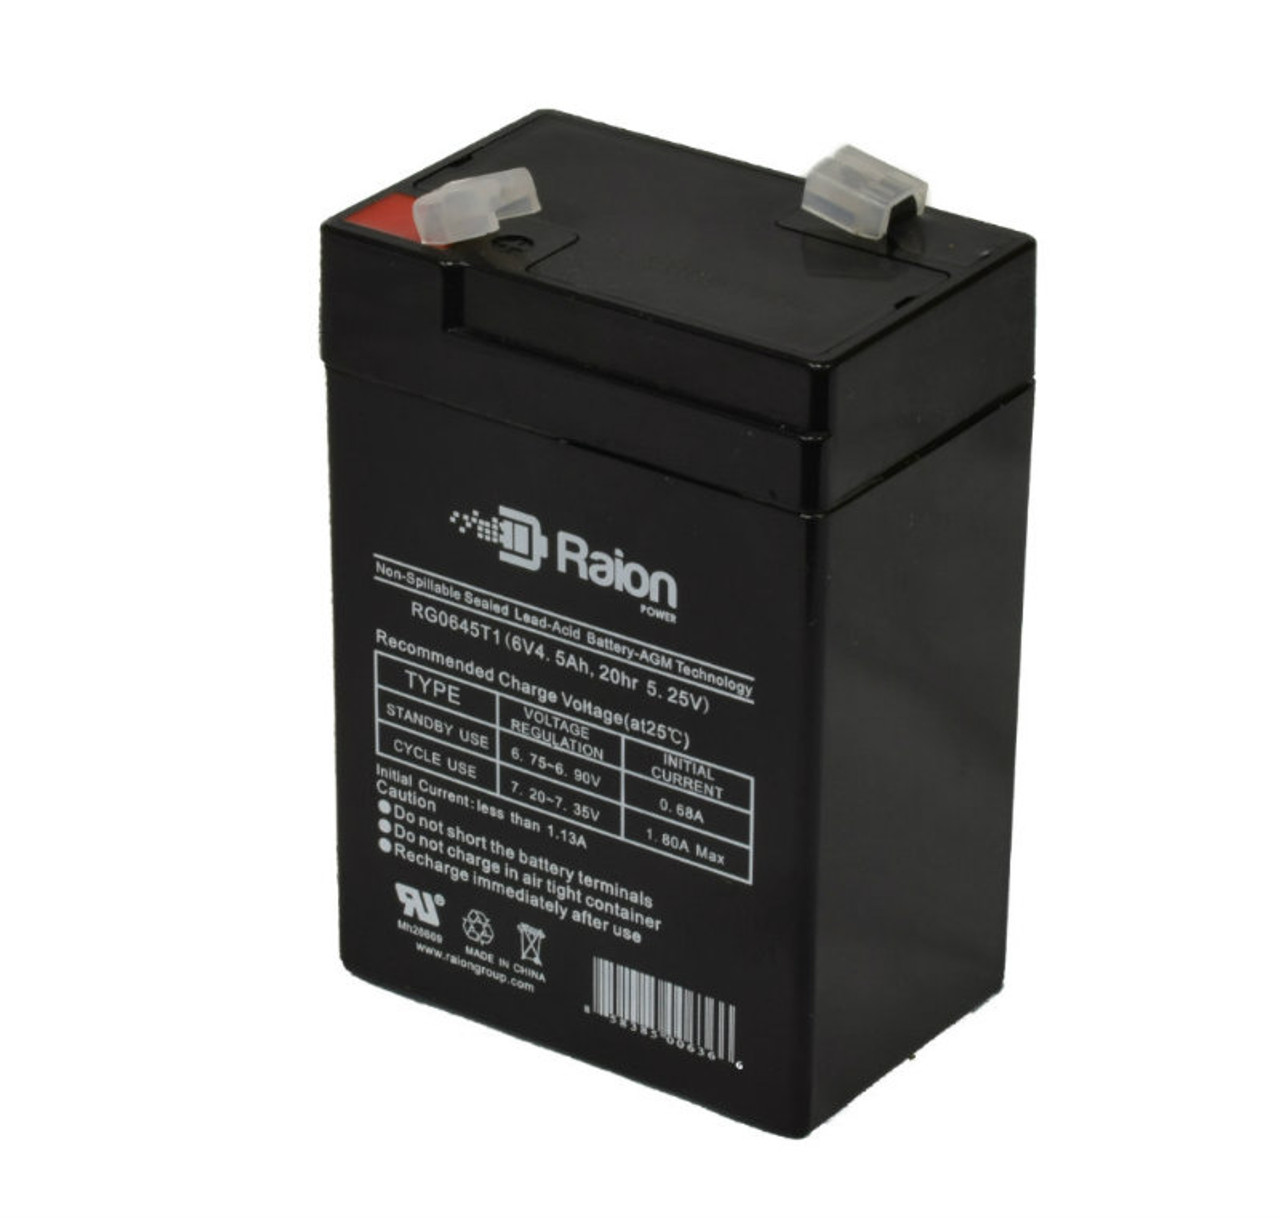 Raion Power RG0645T1 6V 4.5Ah Replacement Battery Cartridge for FullRiver HGL5-6A